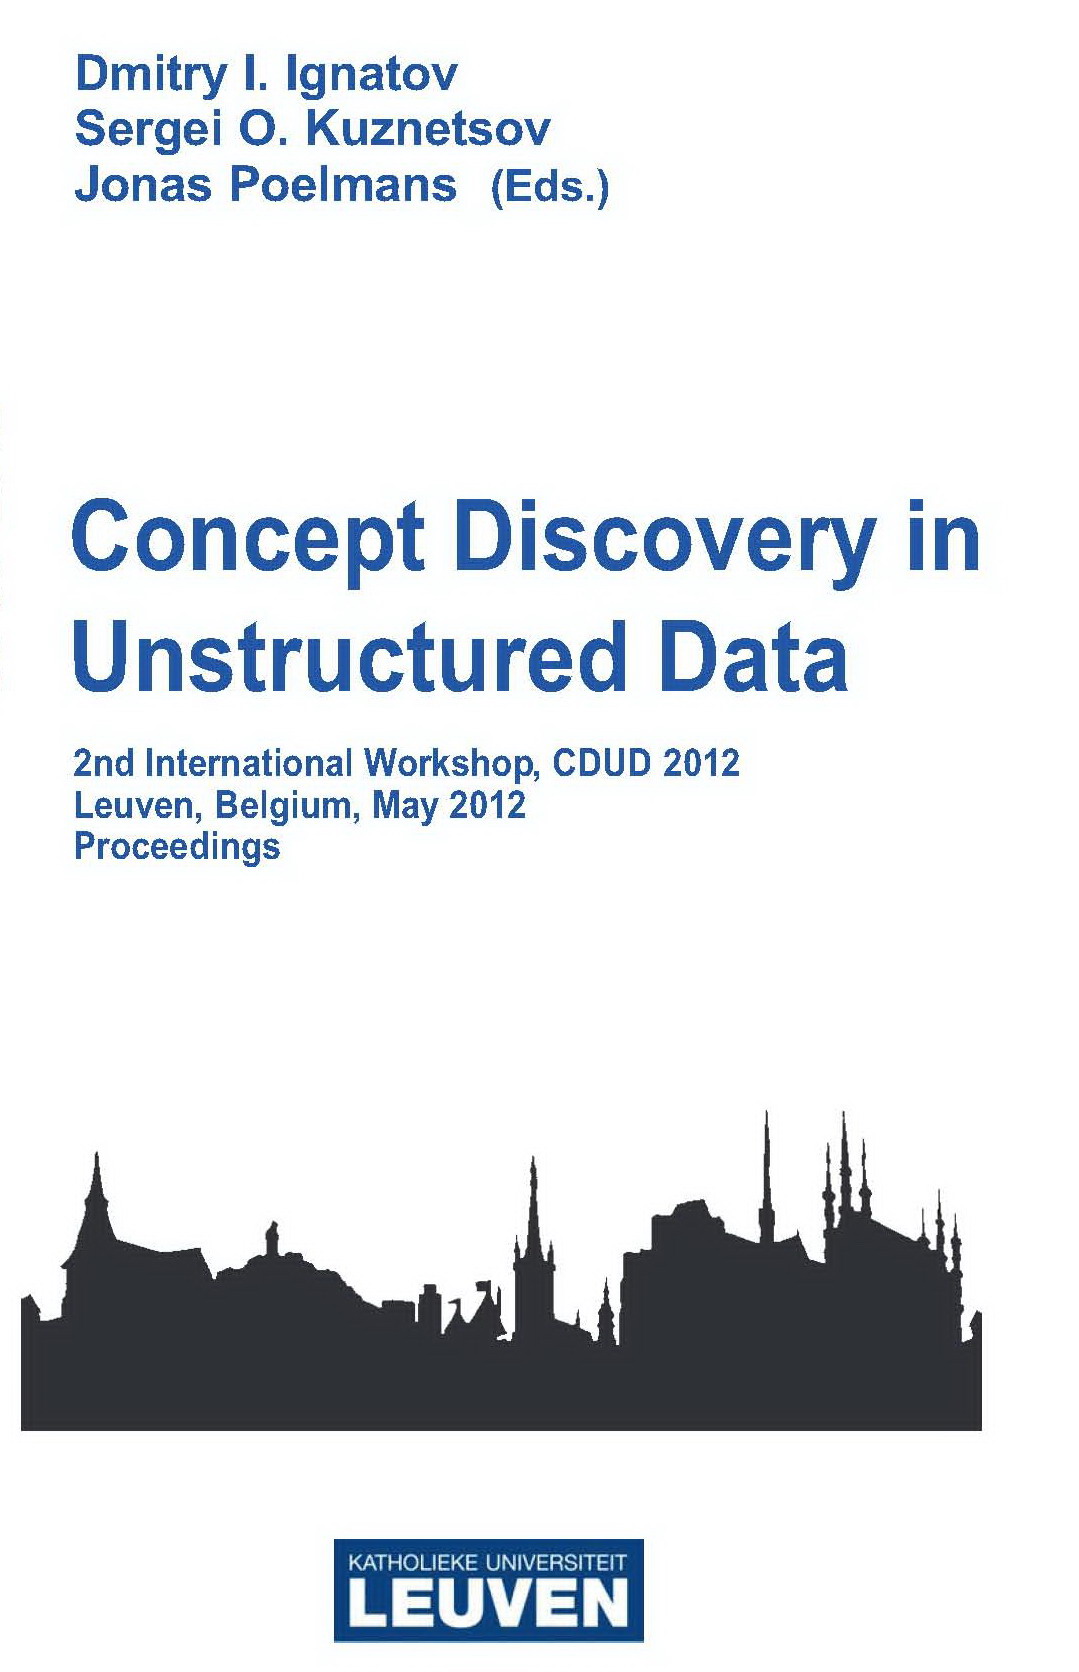 Concept Discovery in Unstructured Data. 2nd International Workshop, CDUD 2012, Leuven, Belgium, May 2012, Proceedings